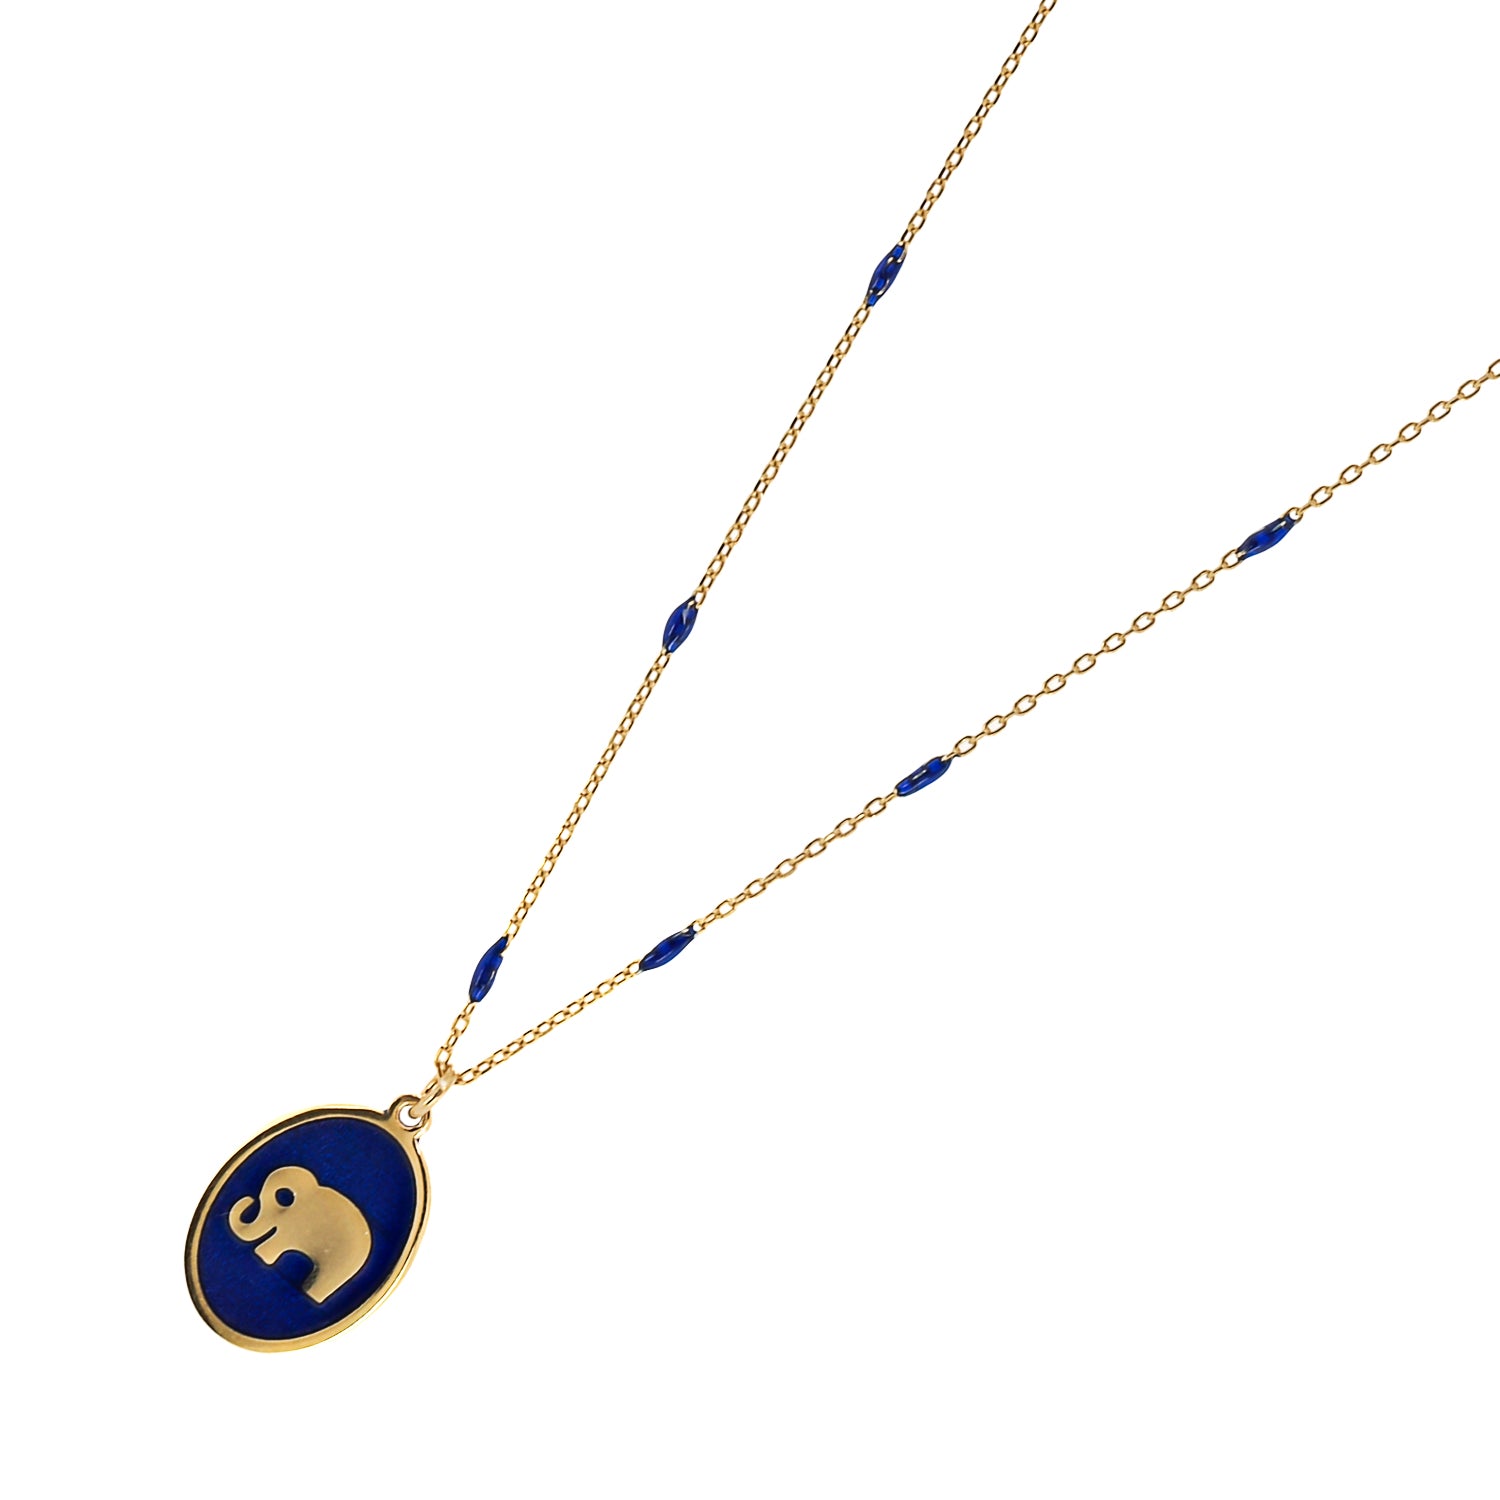 Sterling Silver on 18K Gold Plated Chain - Timeless Elegance and Durability.